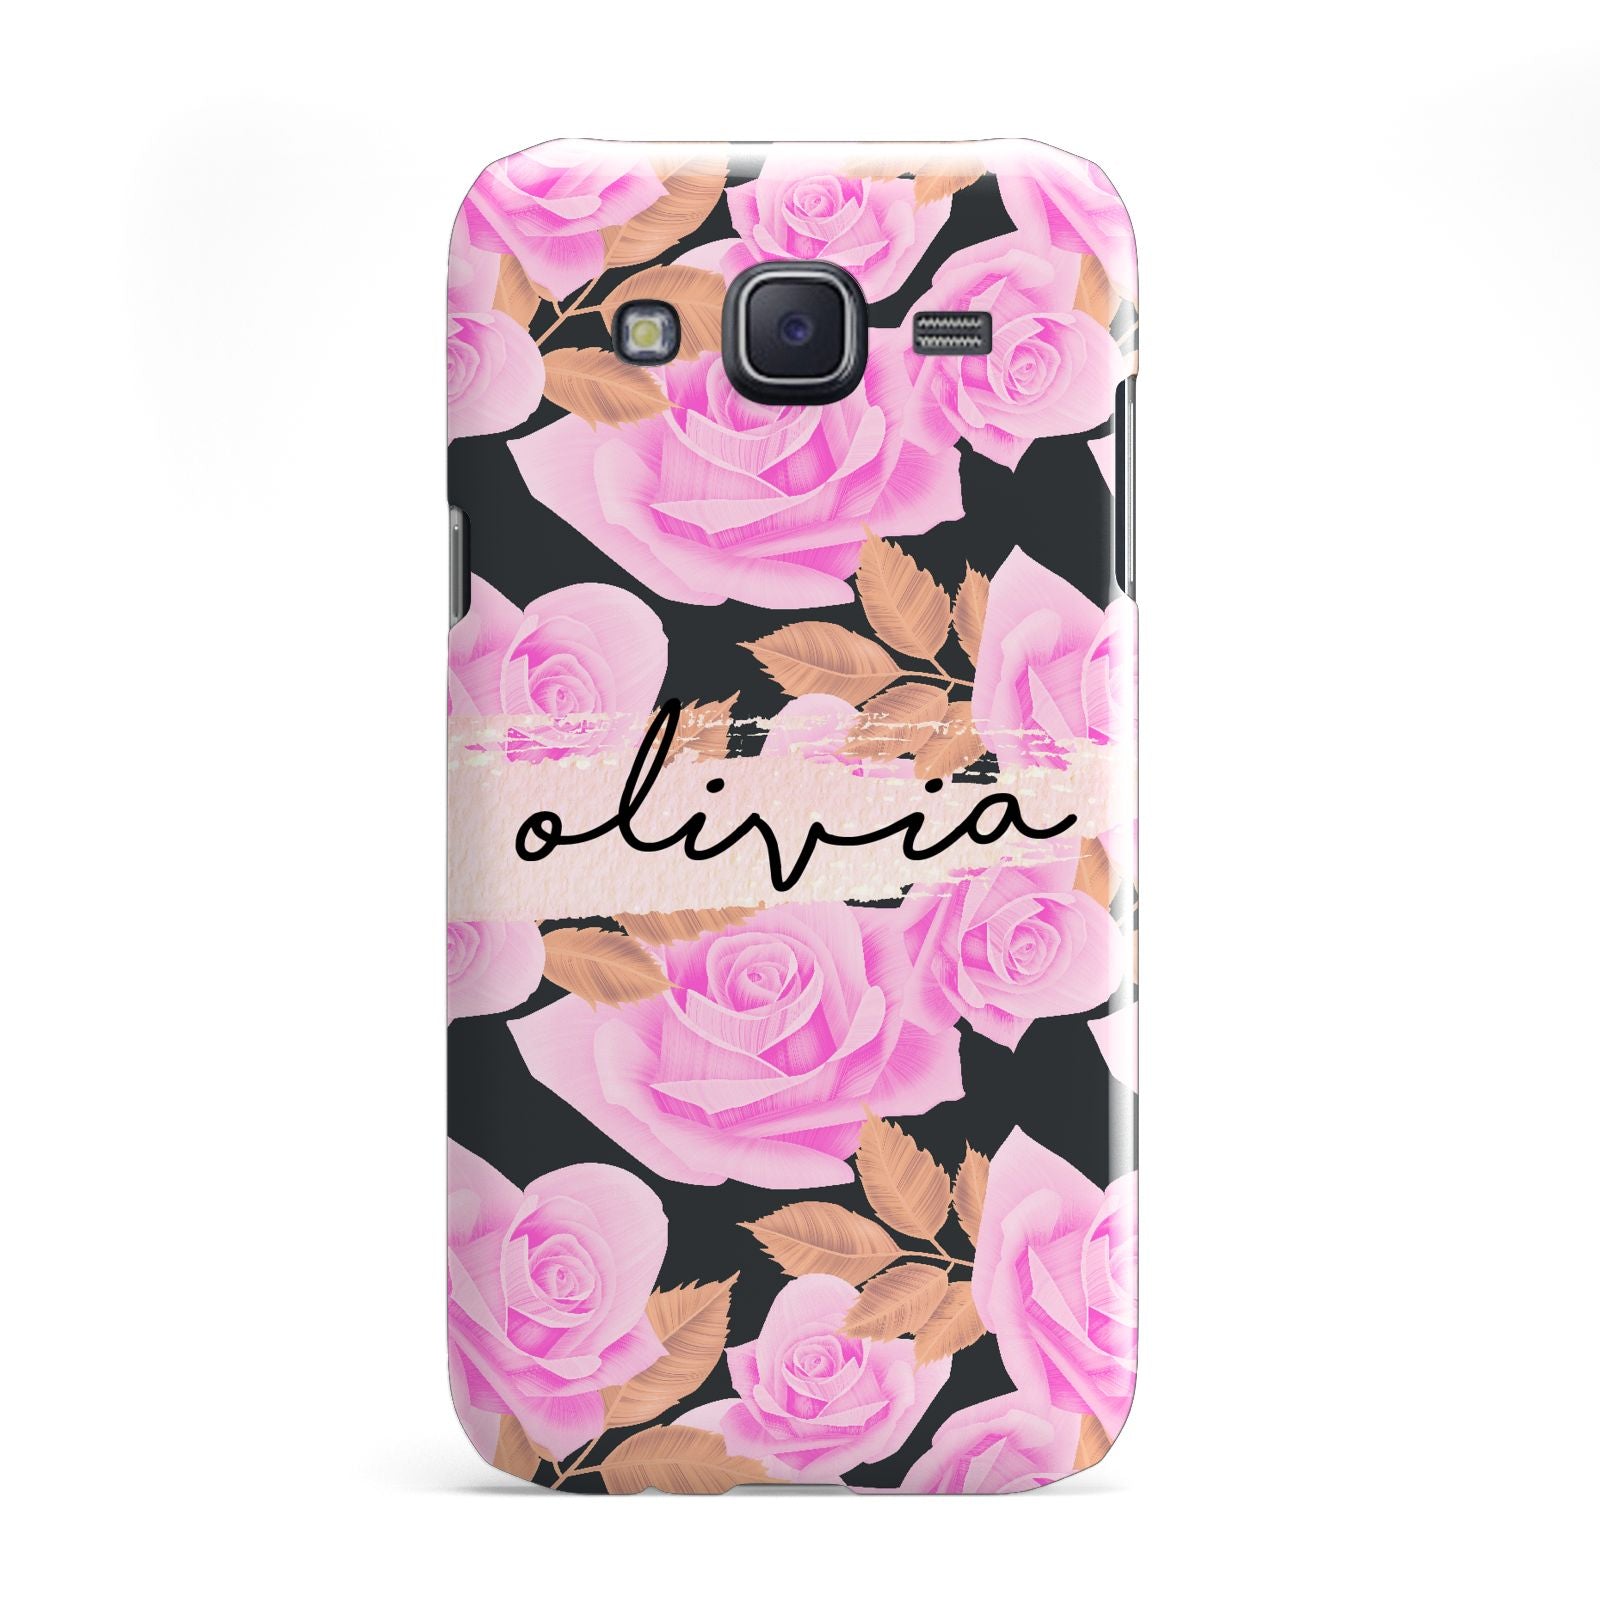 Personalised Floral Pink Roses Samsung Galaxy J5 Case